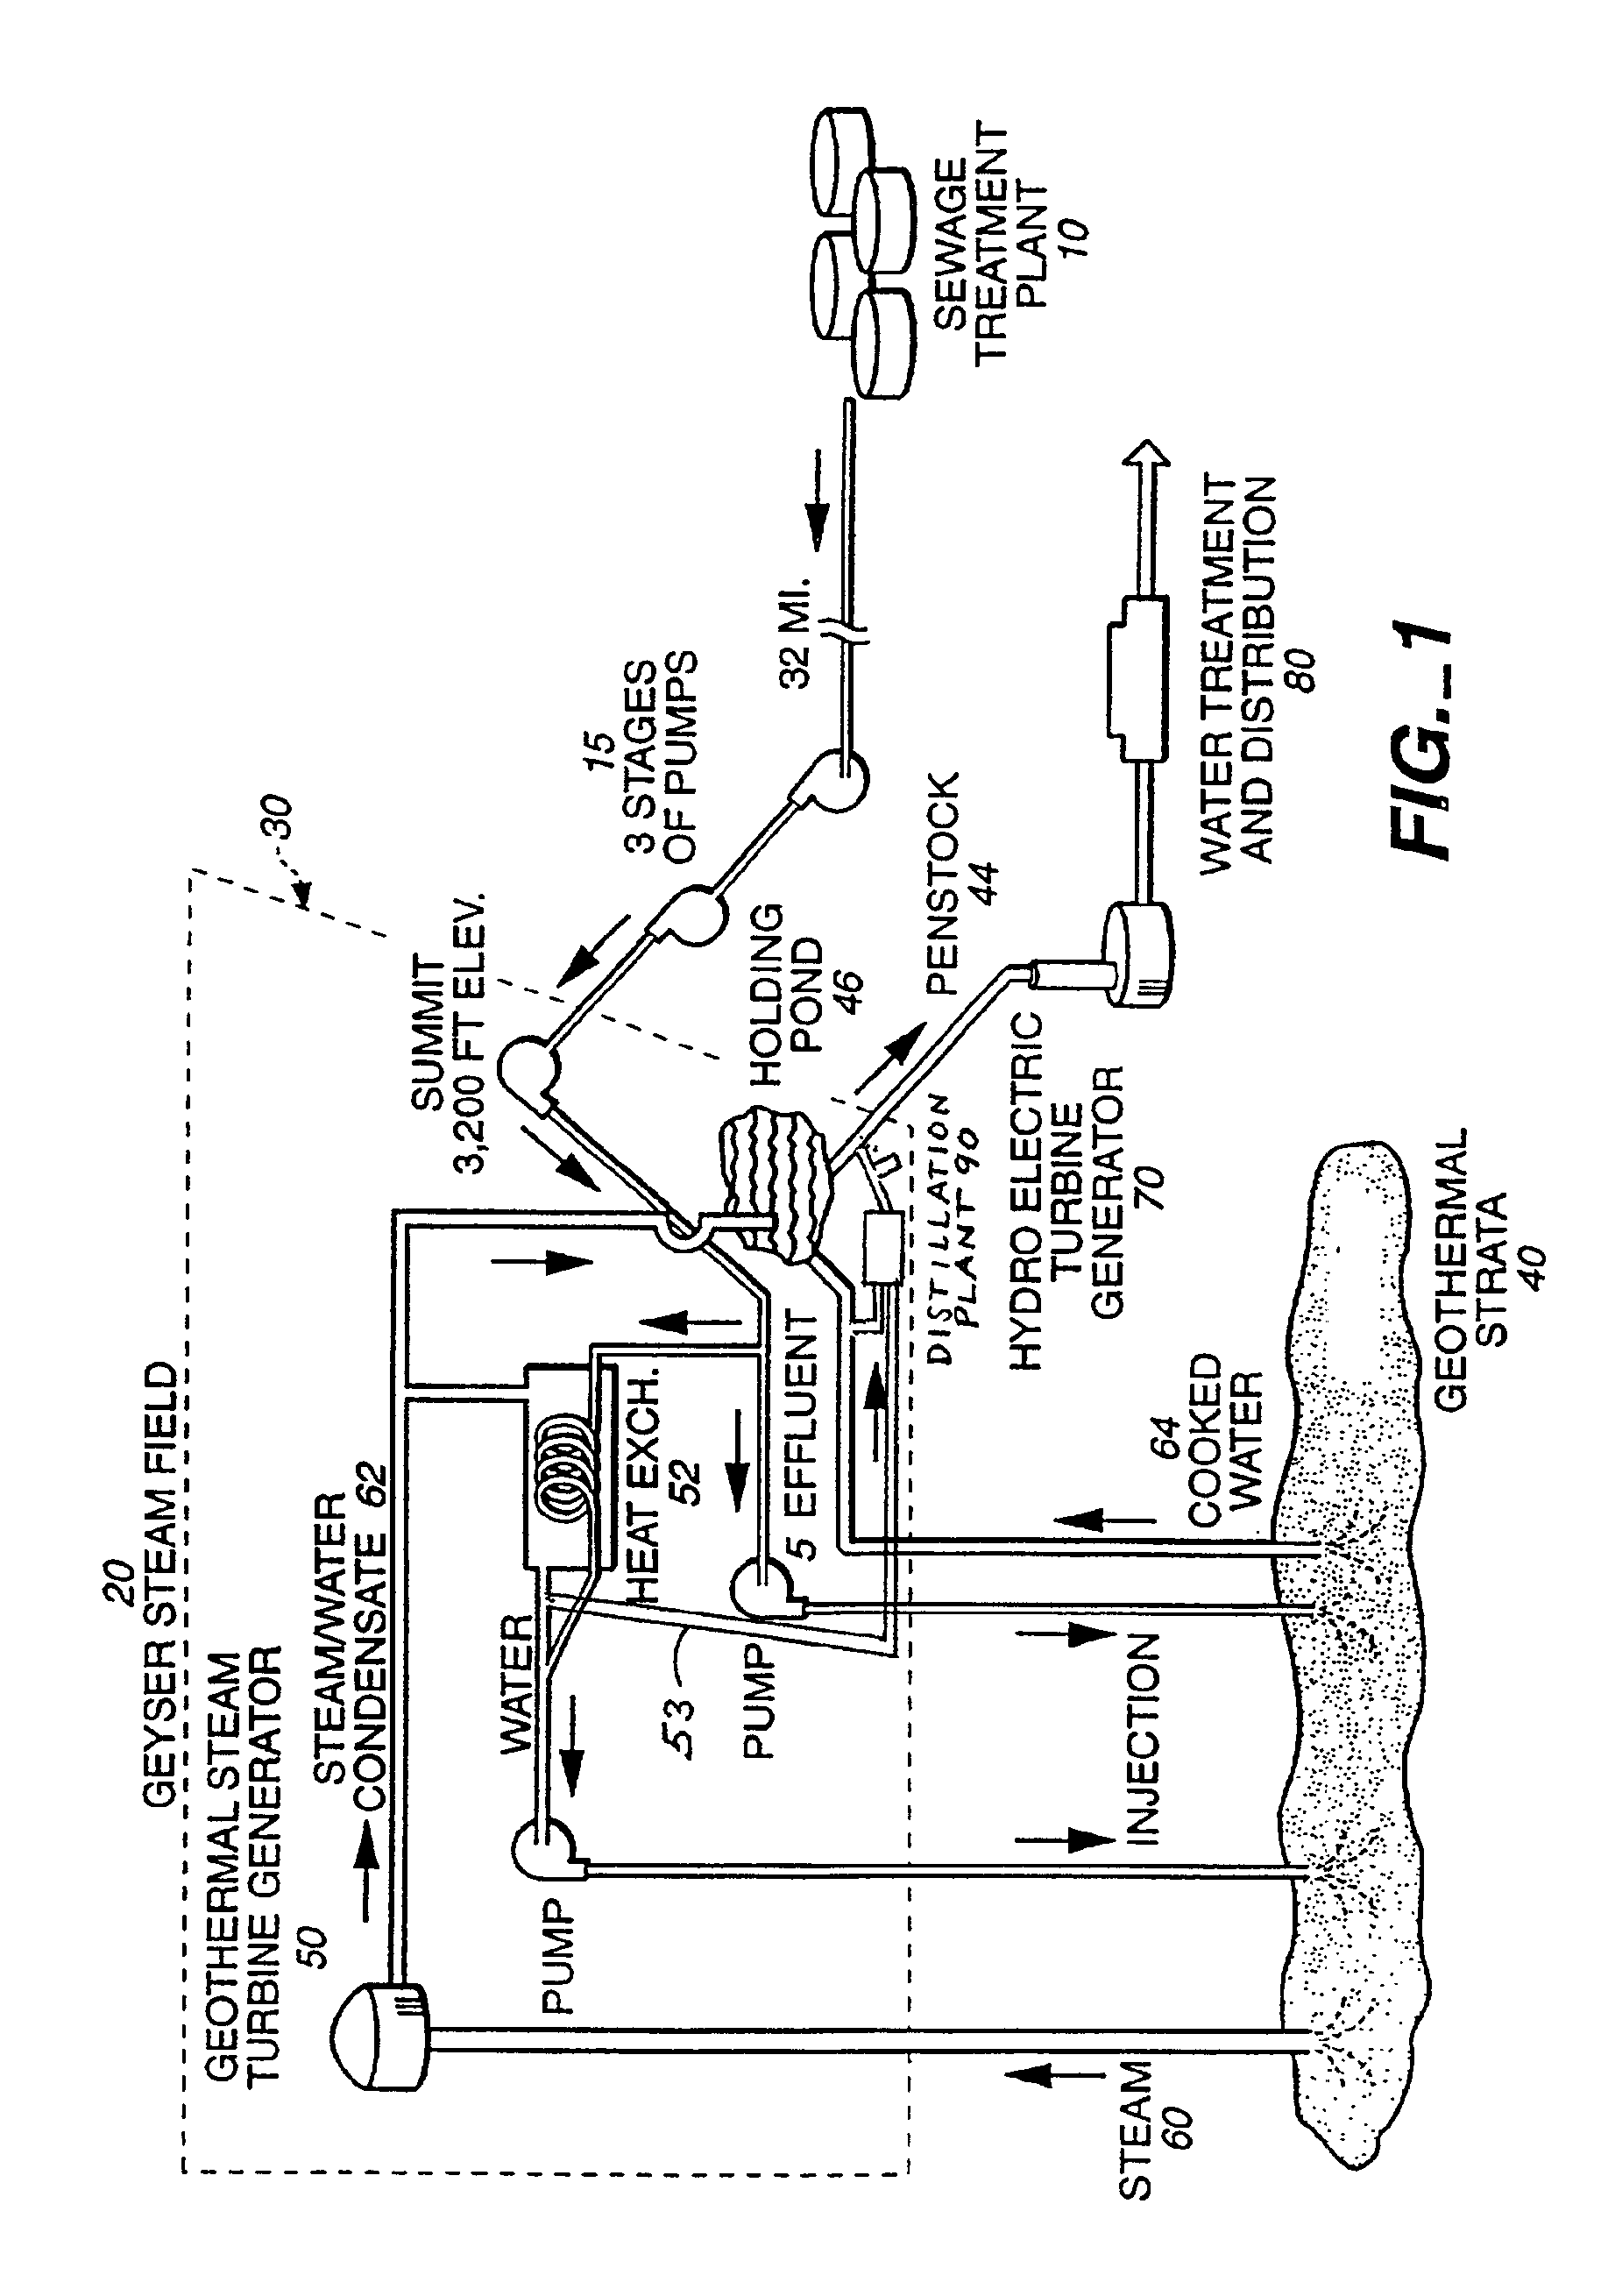 Method of combining wastewater treatment and power generation technologies